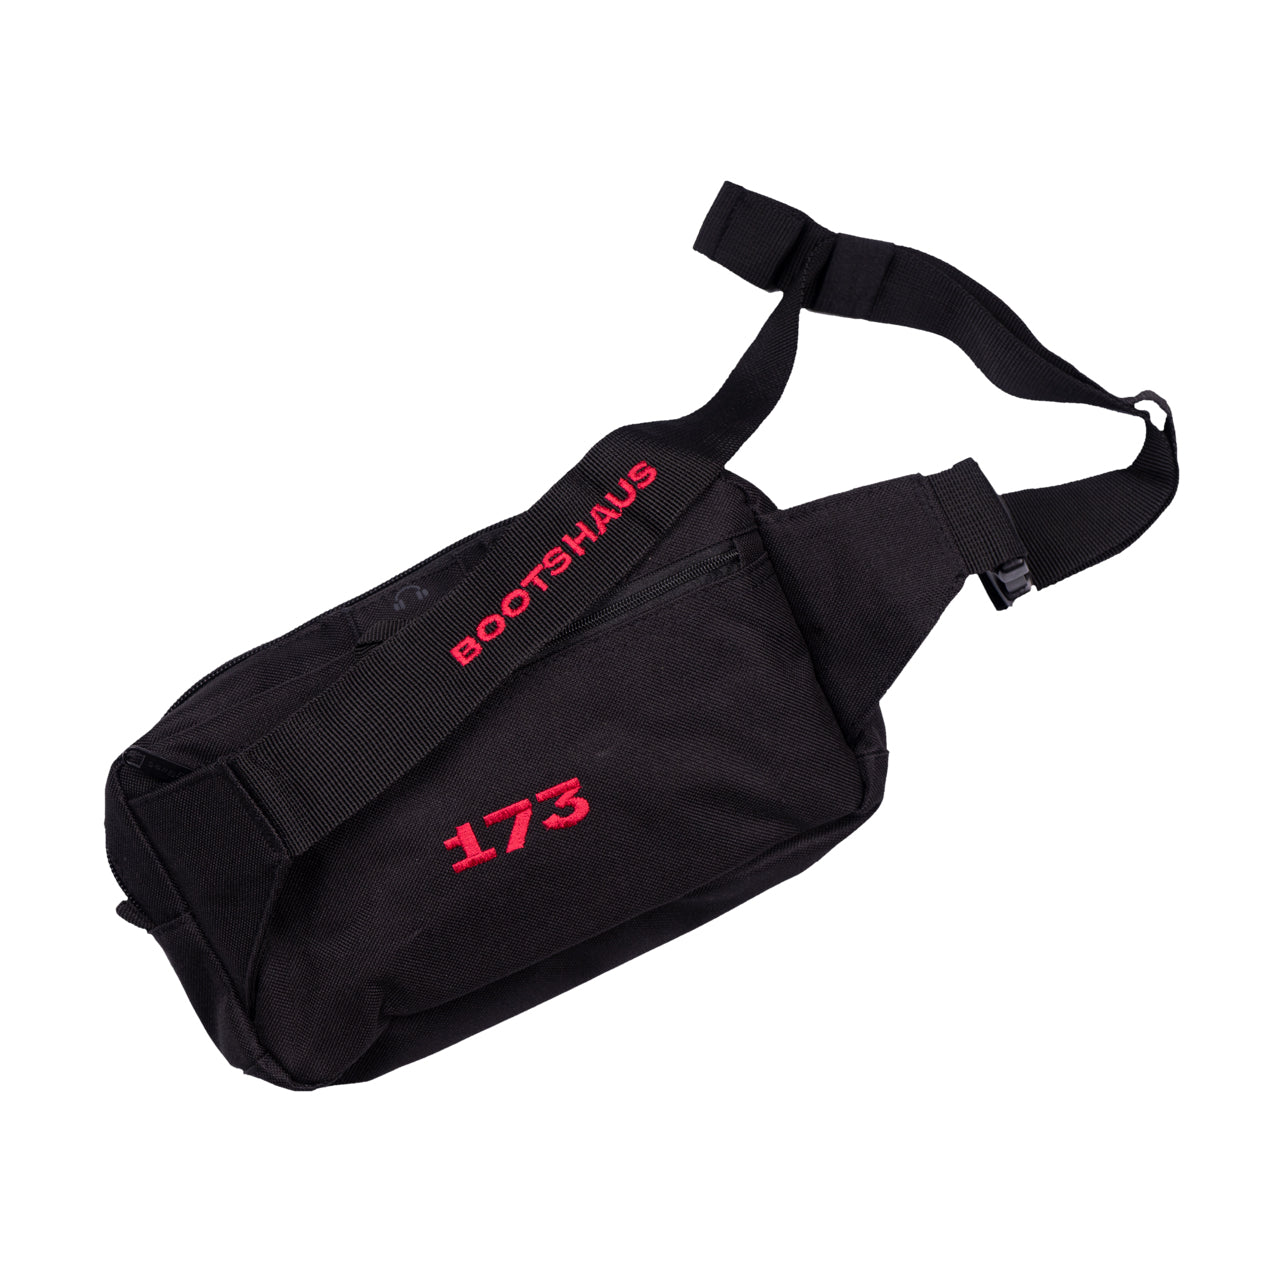 Bootshaus - Emblem Waistbag (red embroidery)